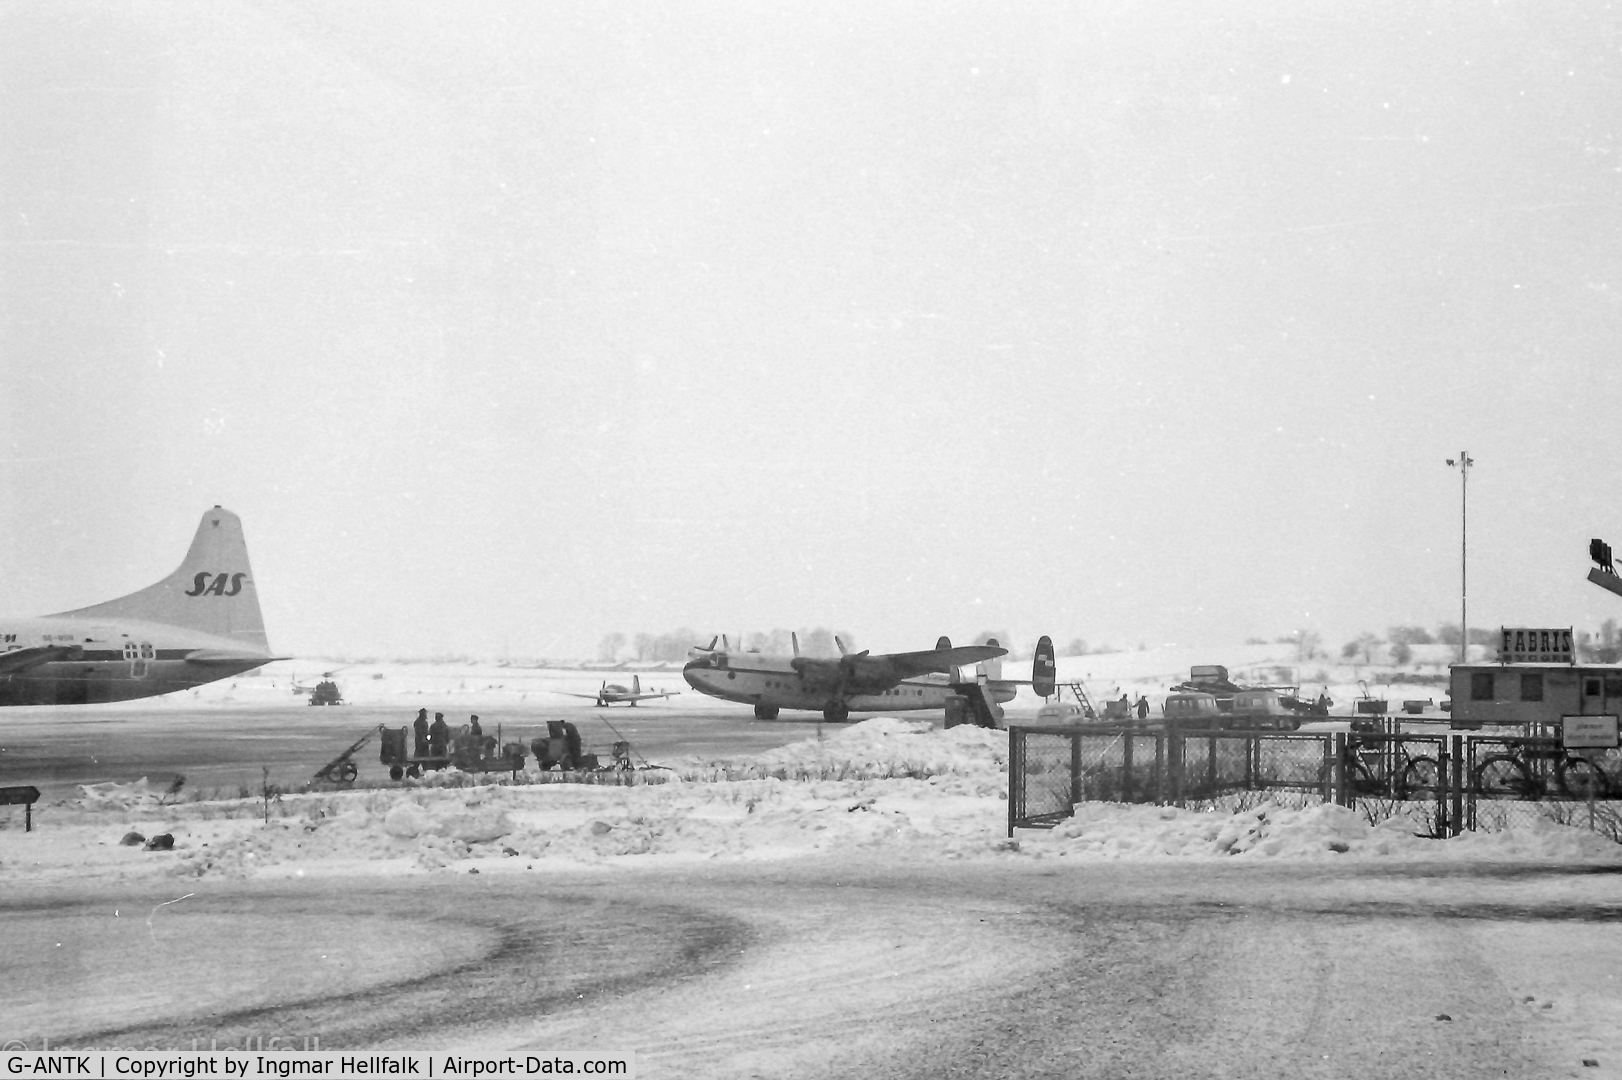 G-ANTK, 1946 Avro 685 YORK C1 C/N MW232, G-ANTK at Bulltofta Airport (Malmoe,Sweden) early 60-ies. This photo prior the previously from takeoff!